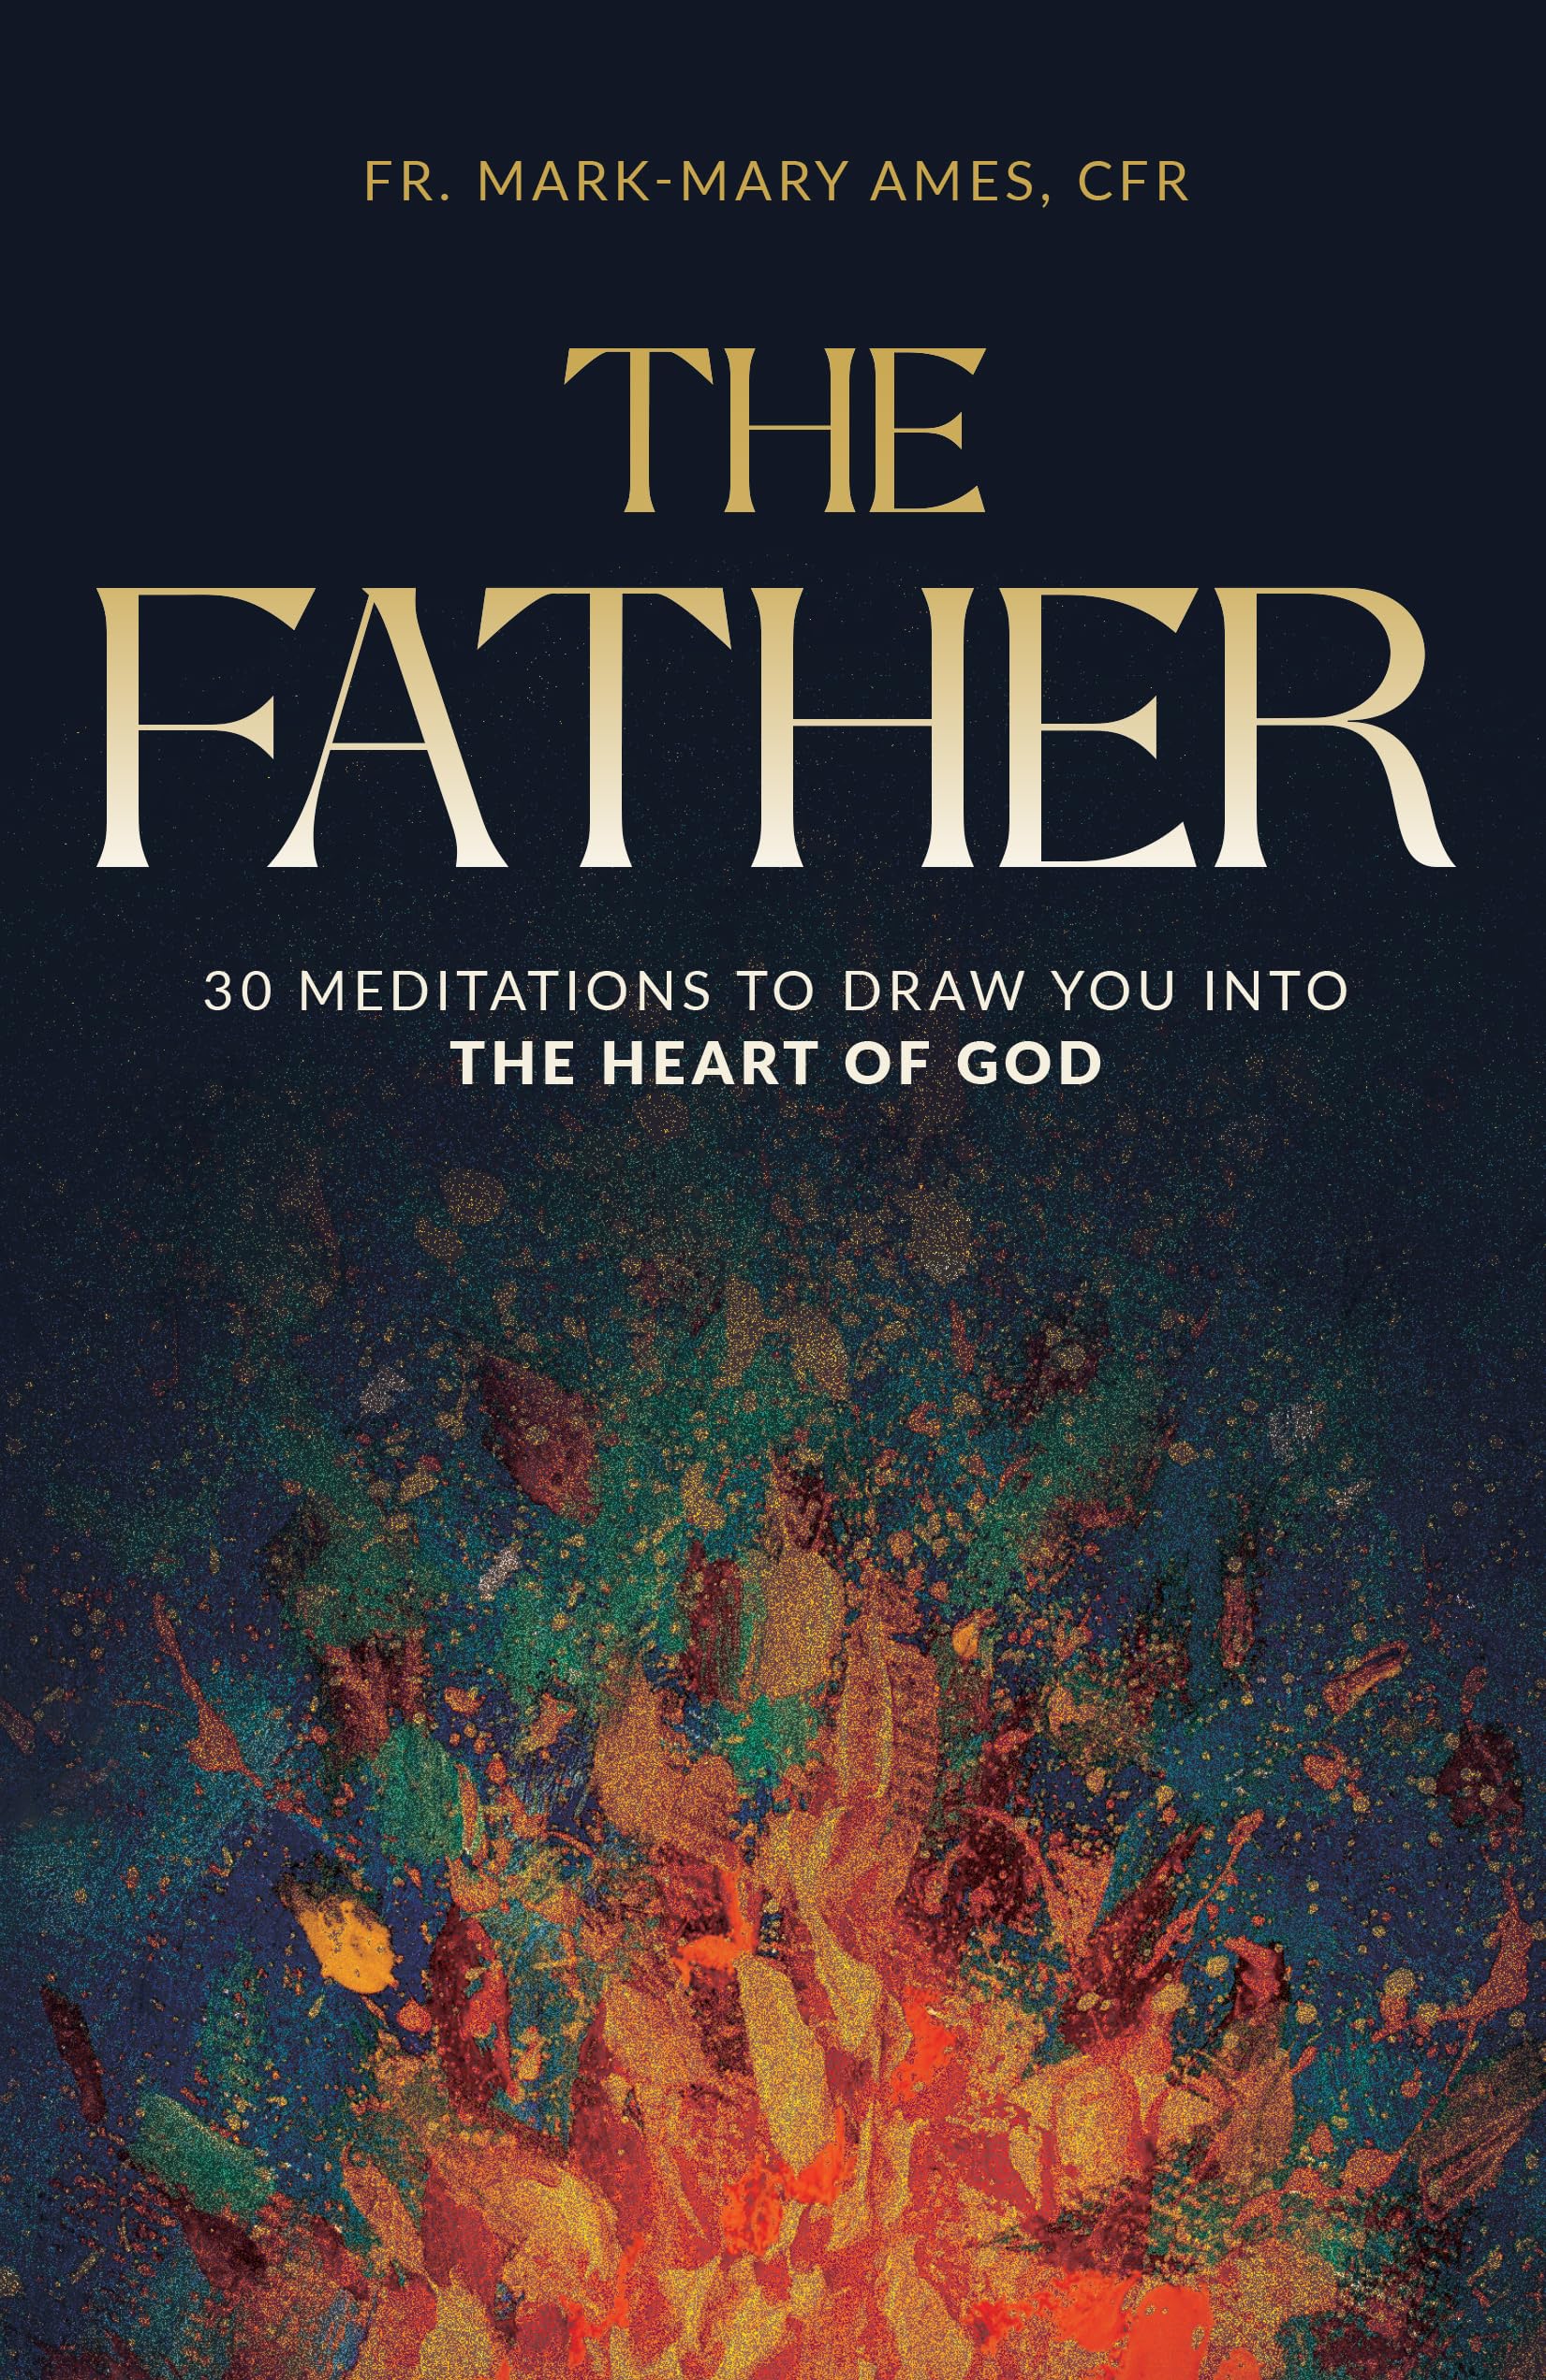 The Father: 30 Meditions to Draw You into the Heart of God